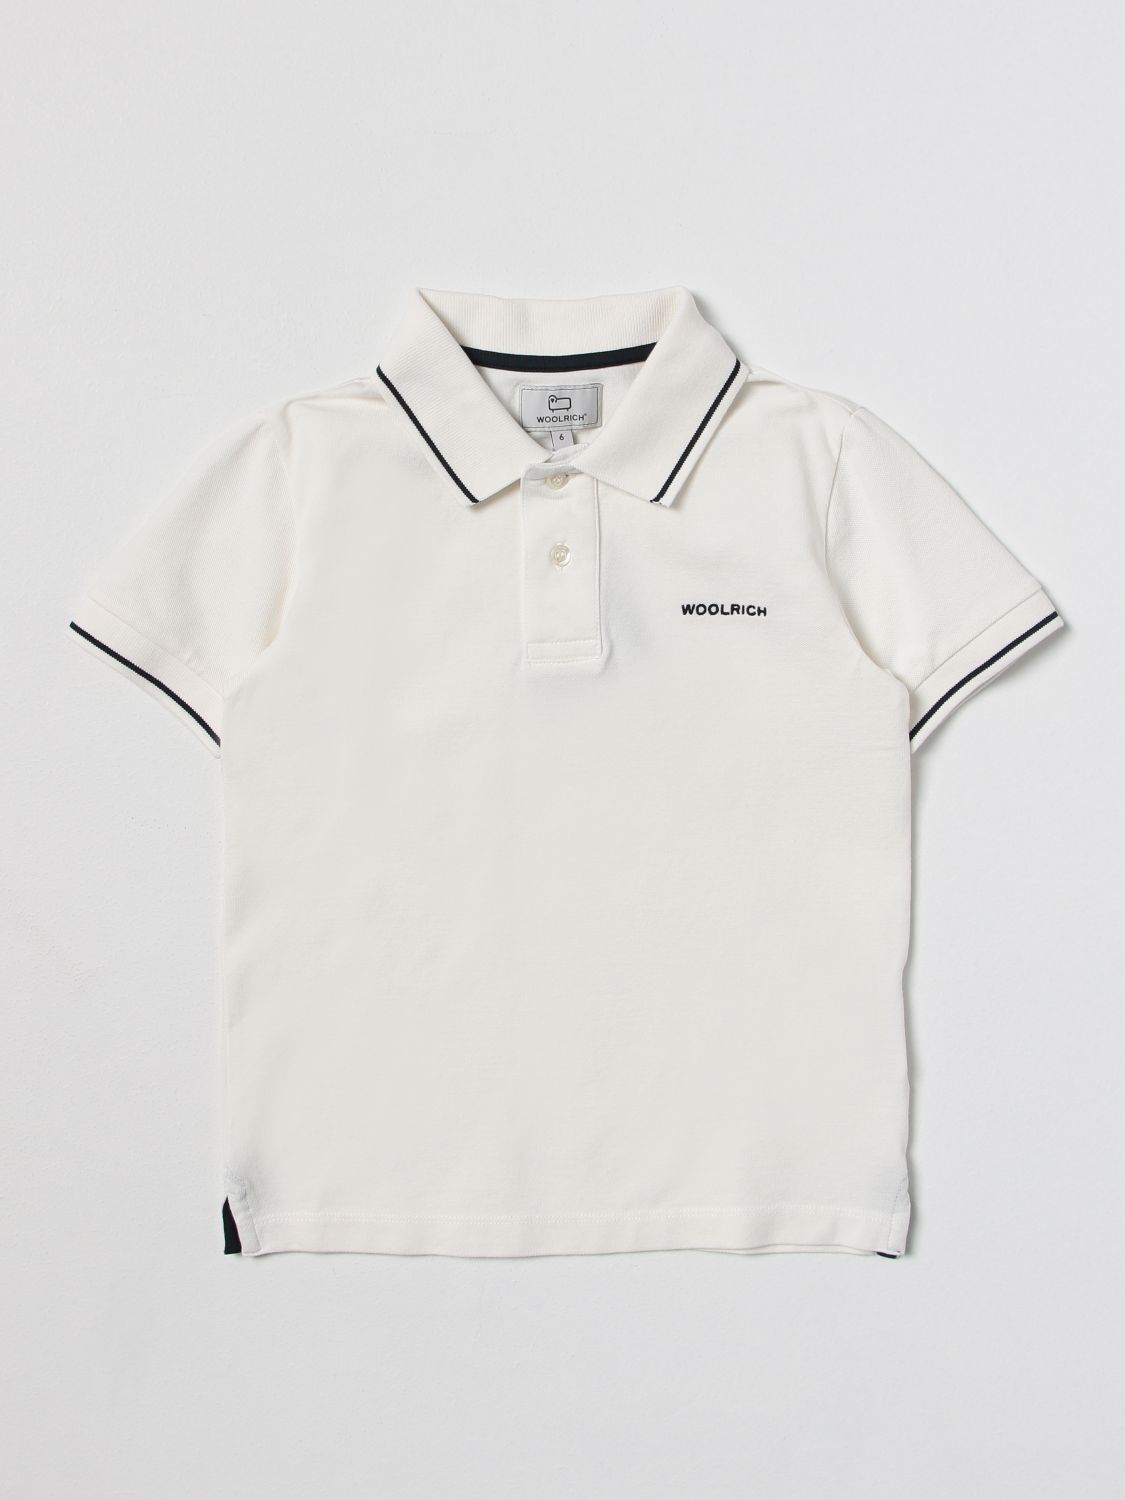 WOOLRICH POLO SHIRT WOOLRICH KIDS COLOR WHITE,379235001